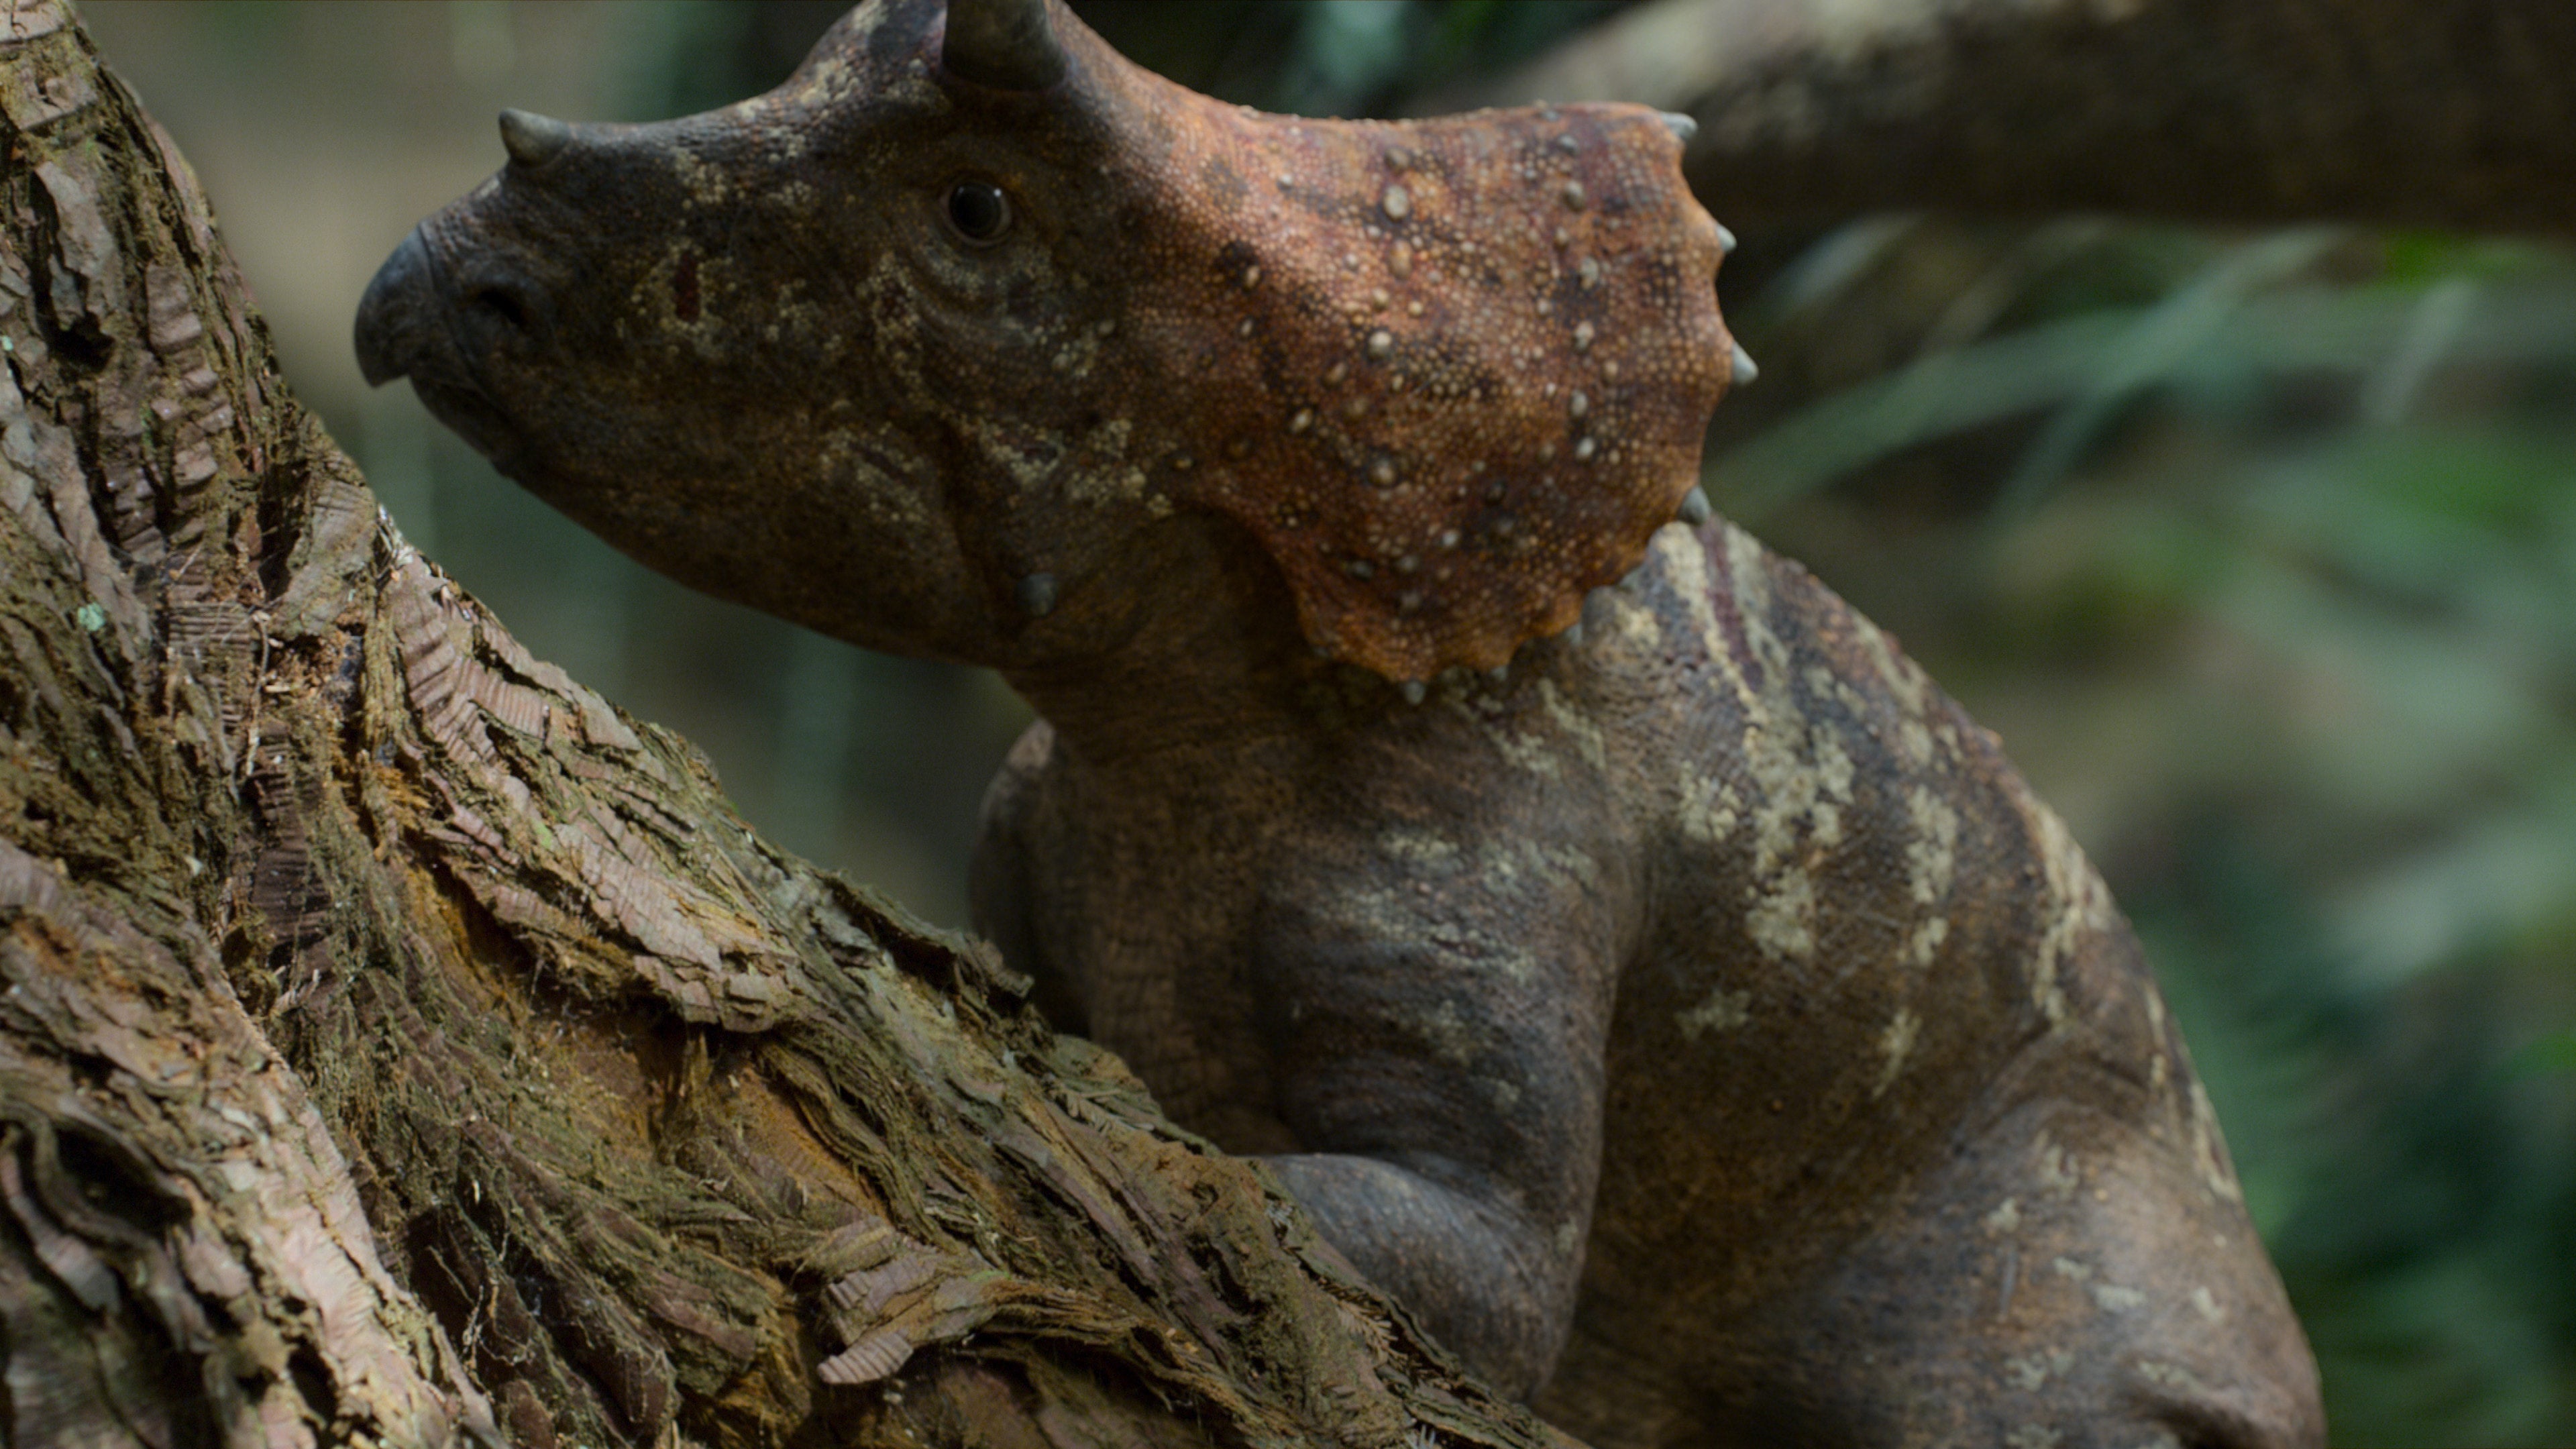 A baby Triceratops in a forest. (Image: Apple)